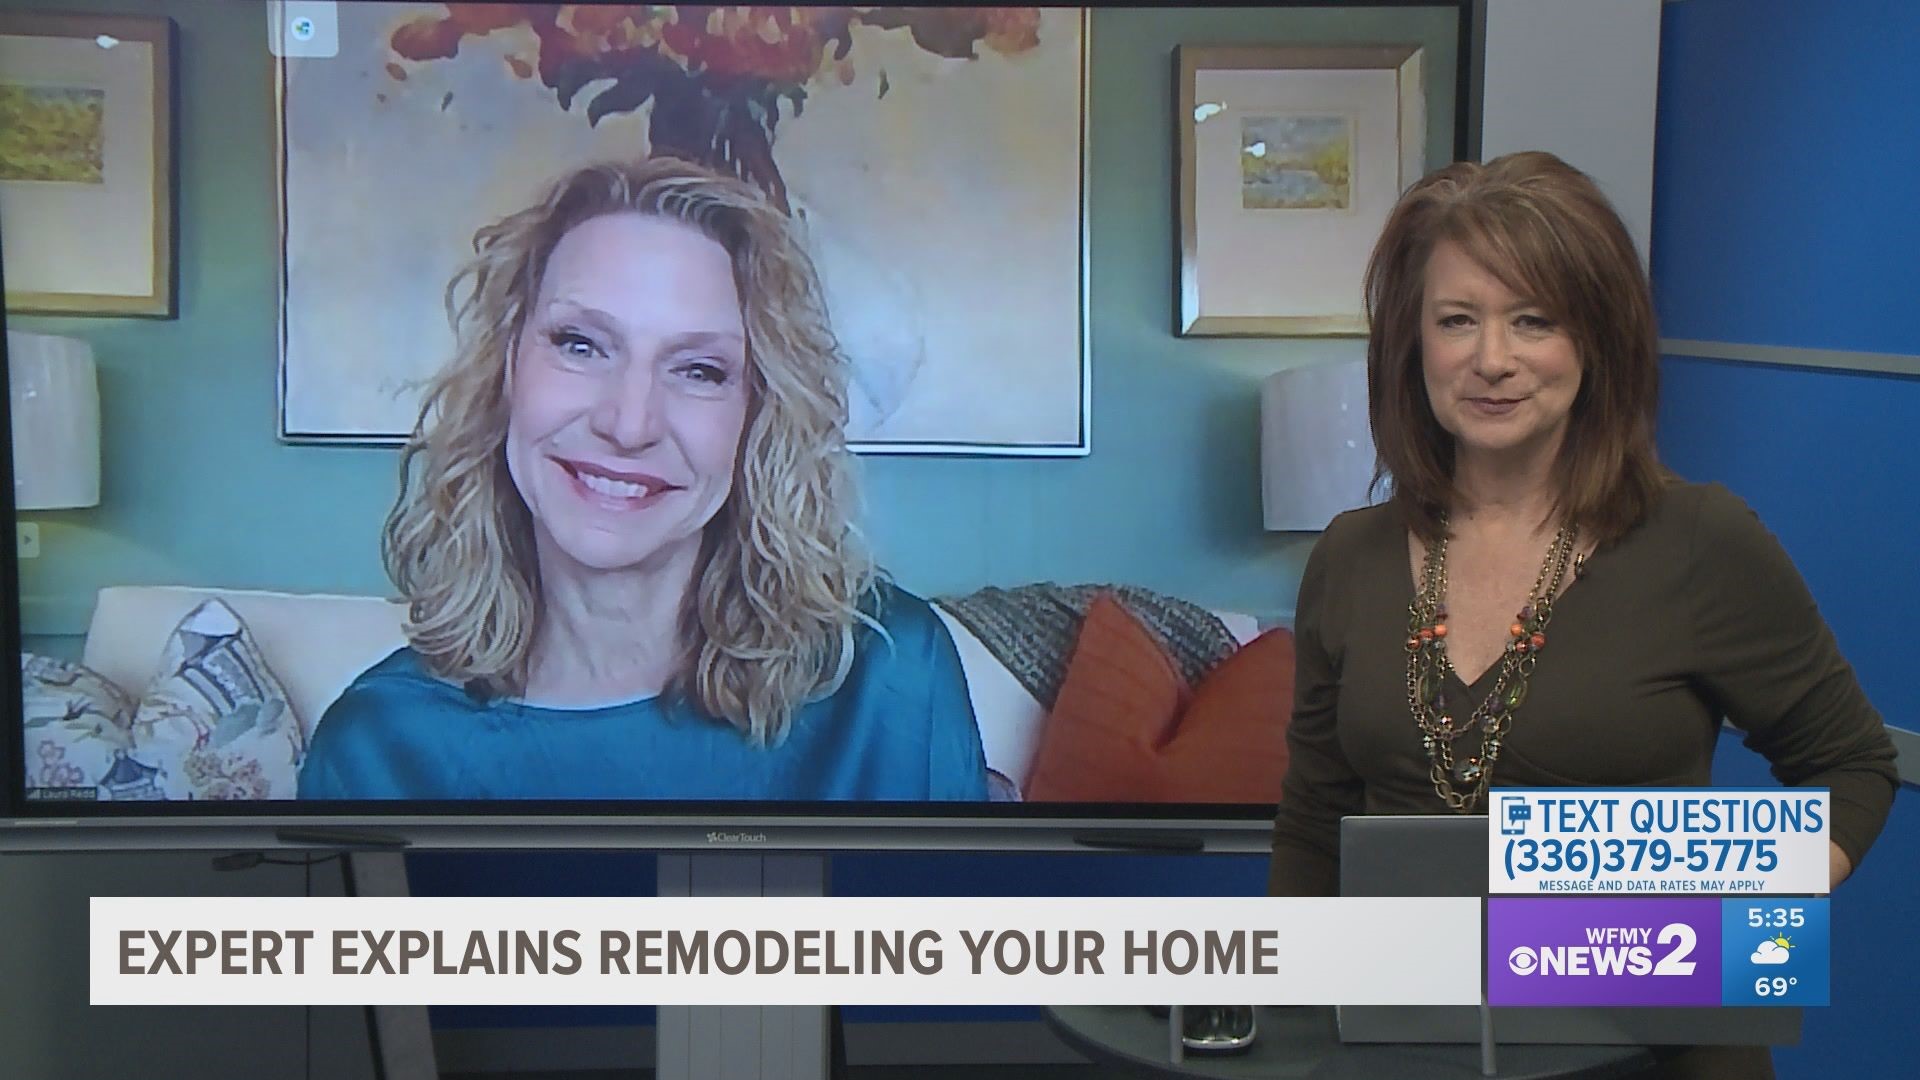 Laura Redd said people often make two common mistakes during the remodeling process.